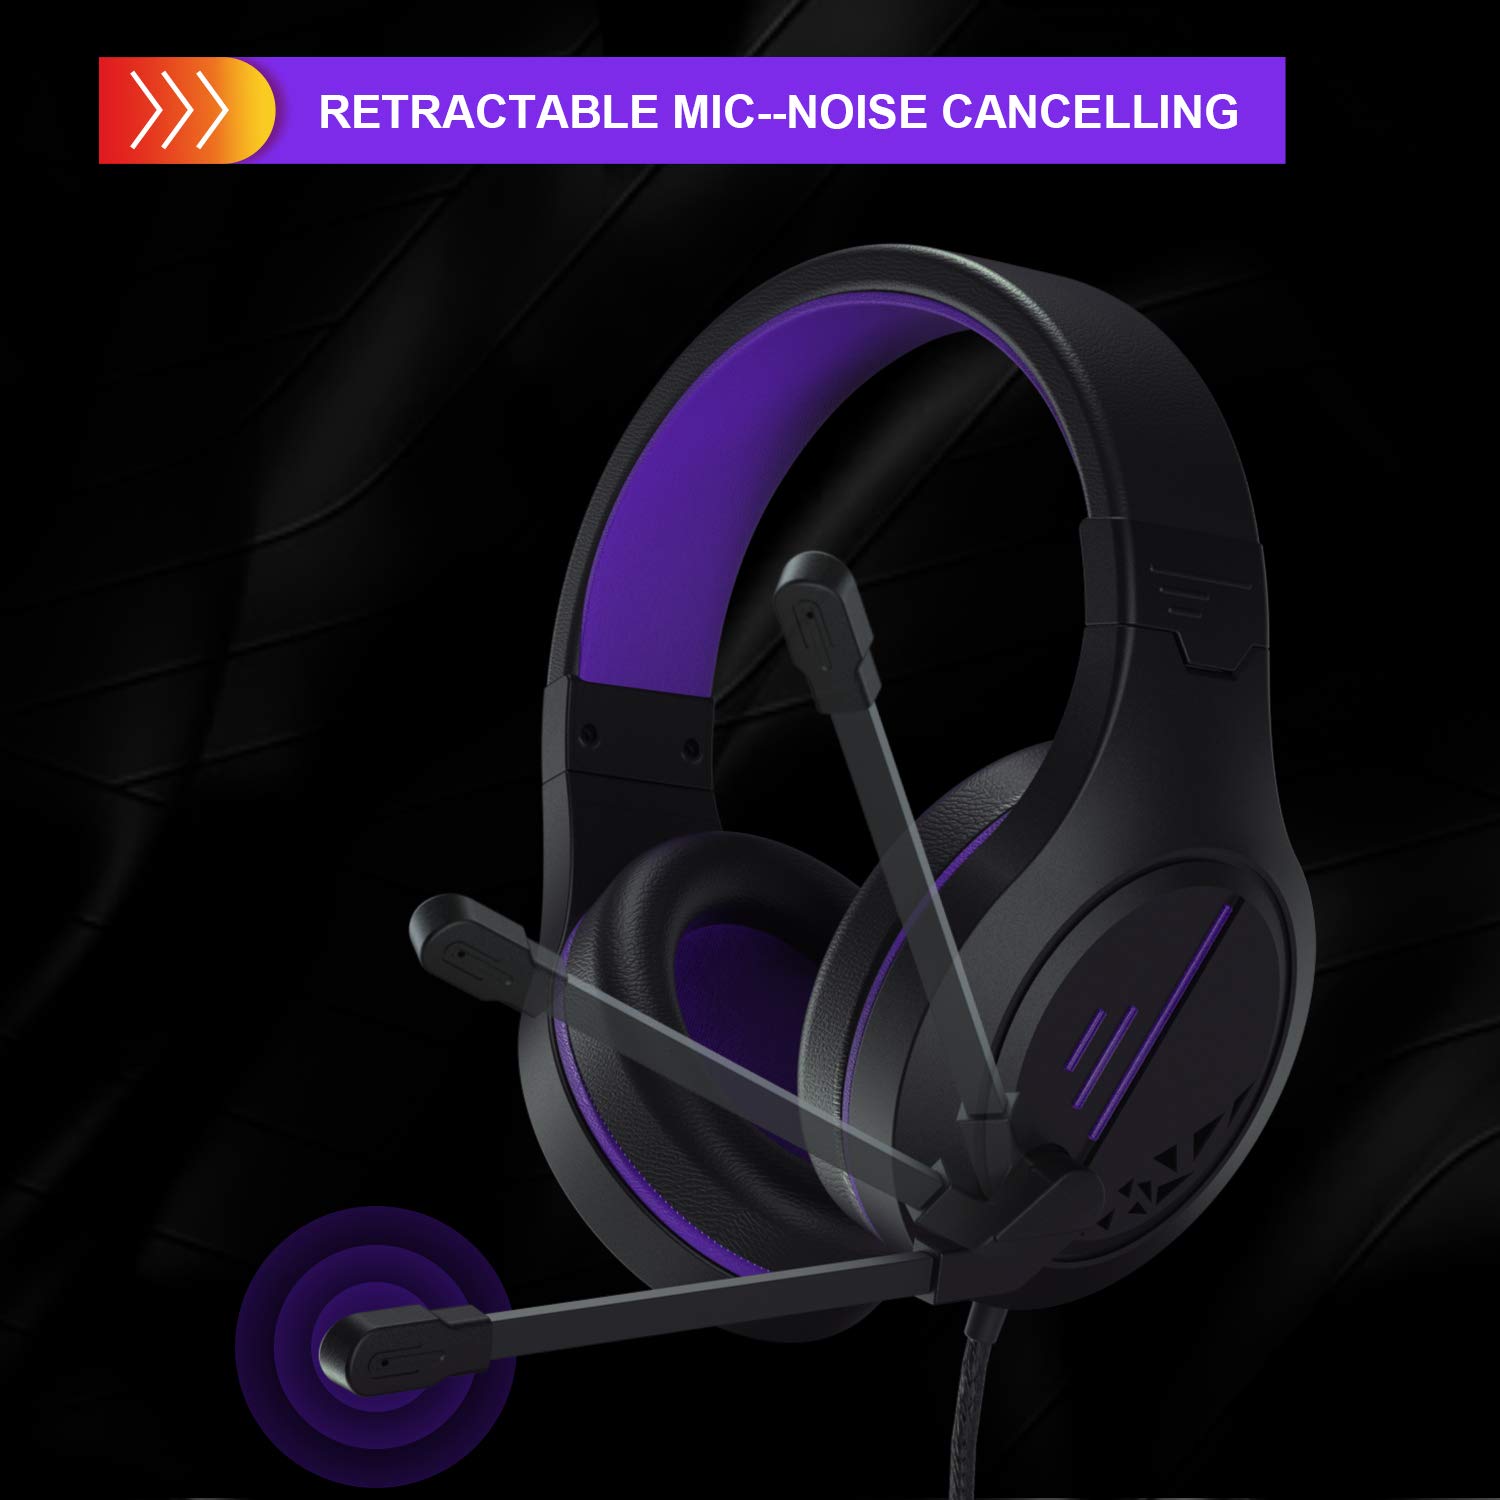 Anivia Stereo Gaming Headset for PS4, PC, Xbox One Controller, Noise Cancelling Over Ear Headphones with Mic, Soft Memory Earmuffs for Laptop/Mac/Nintendo/PS3 Games(Purple)